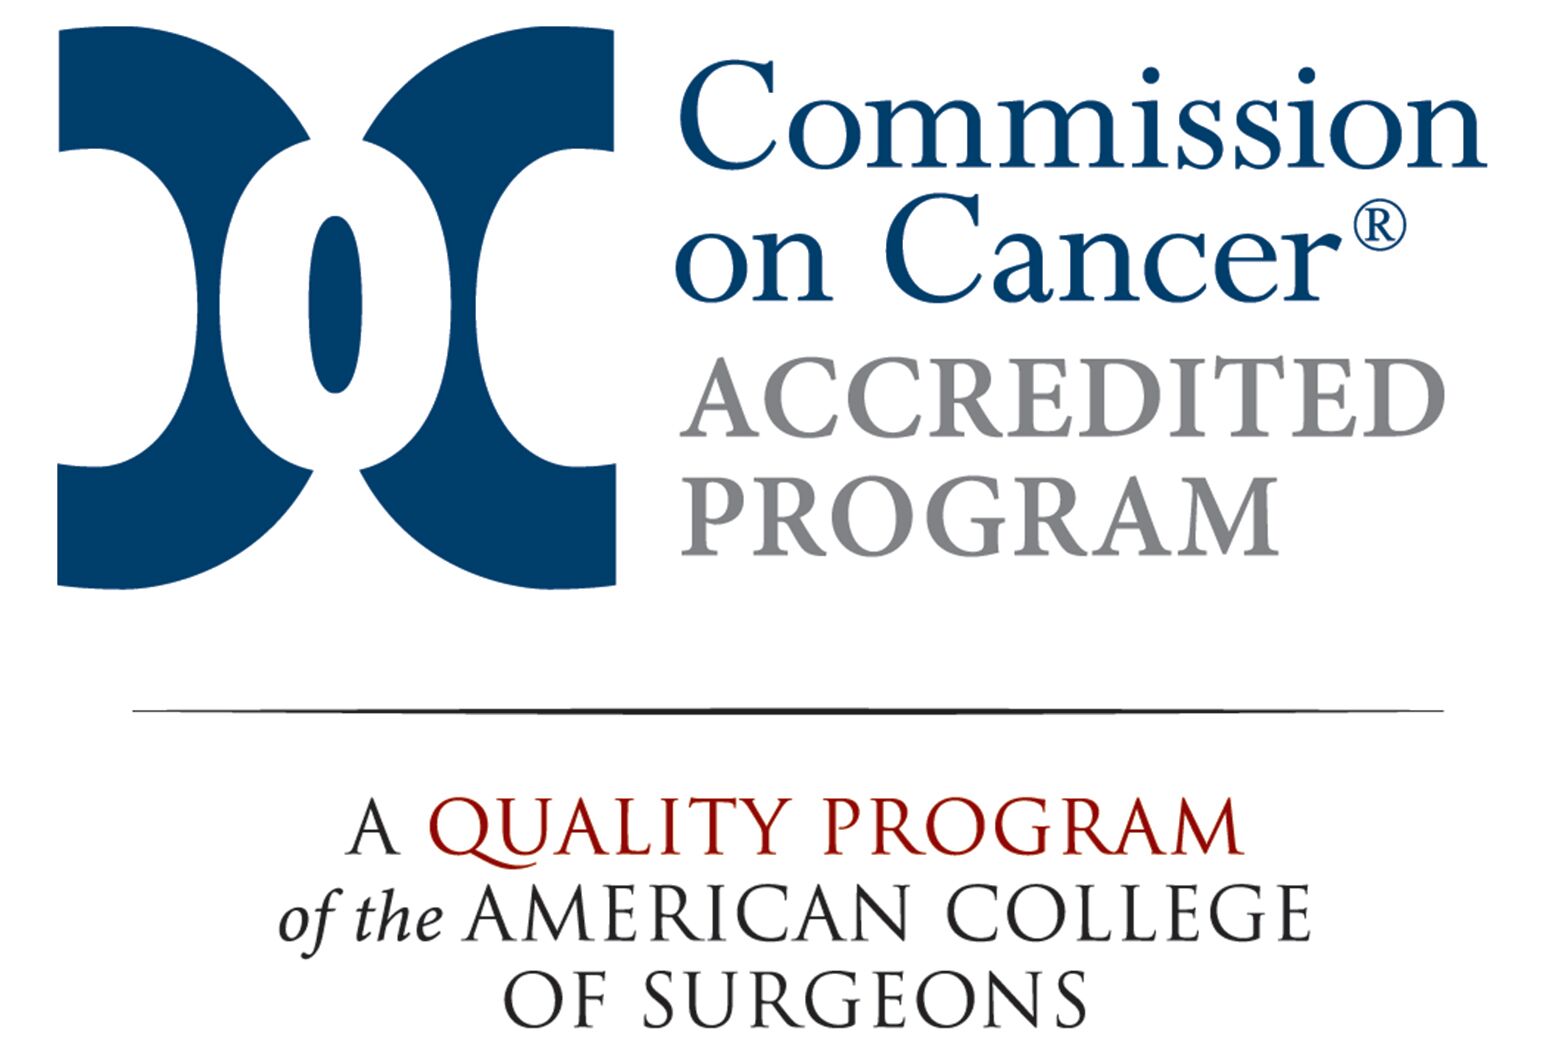 A Quality Program of the American College of Surgeons